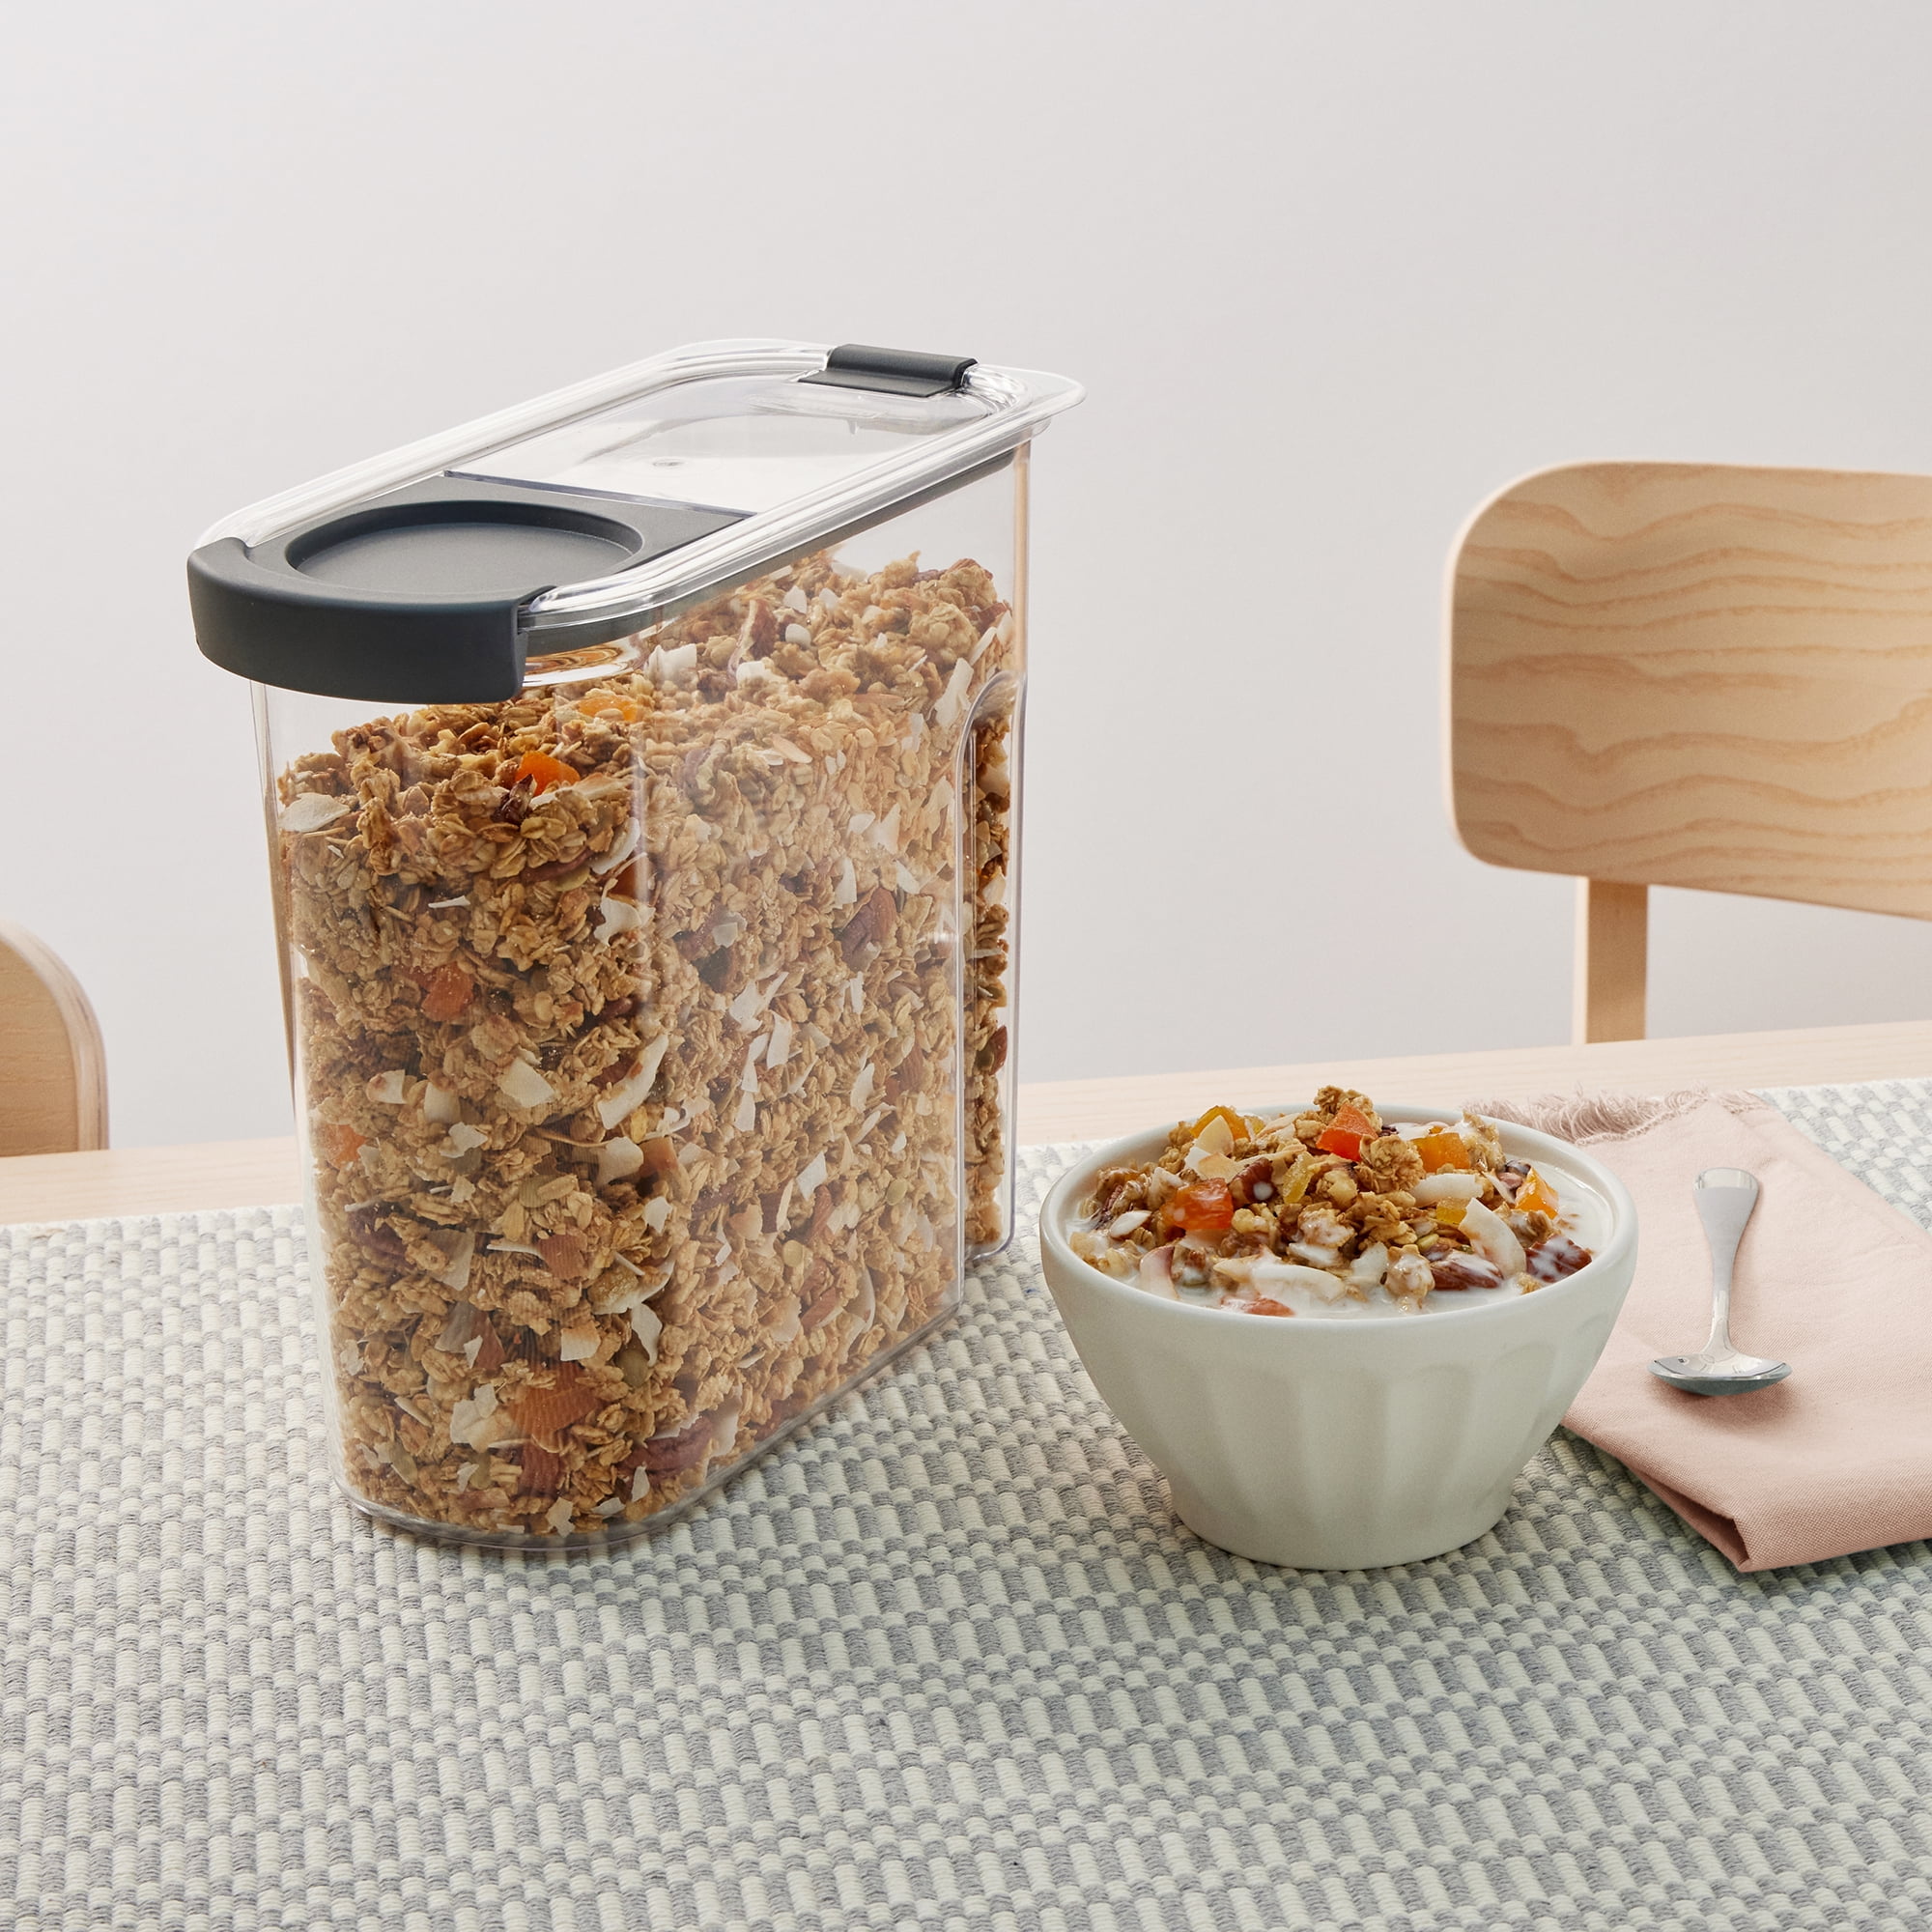 Rubbermaid® Brilliance™ Cereal Keeper Container, 4.5 L - King Soopers